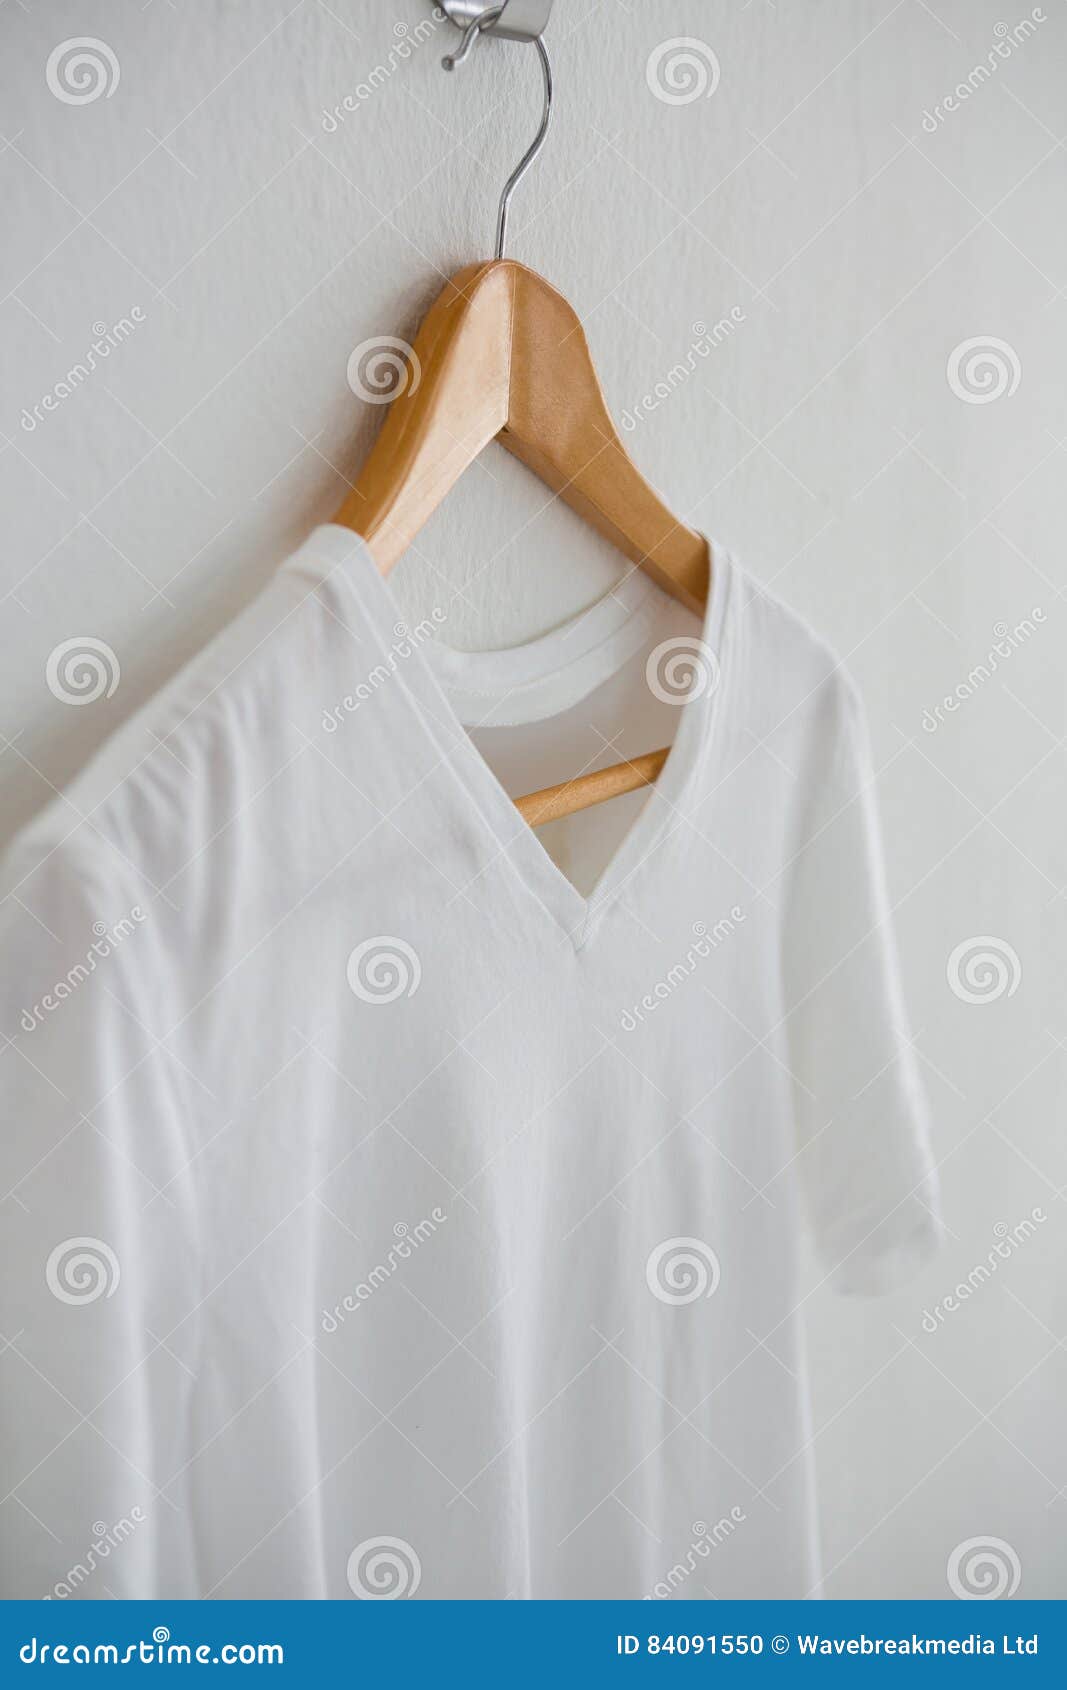 White T-shirt Hanging on Hanger Stock Photo - Image of clothes, cotton ...